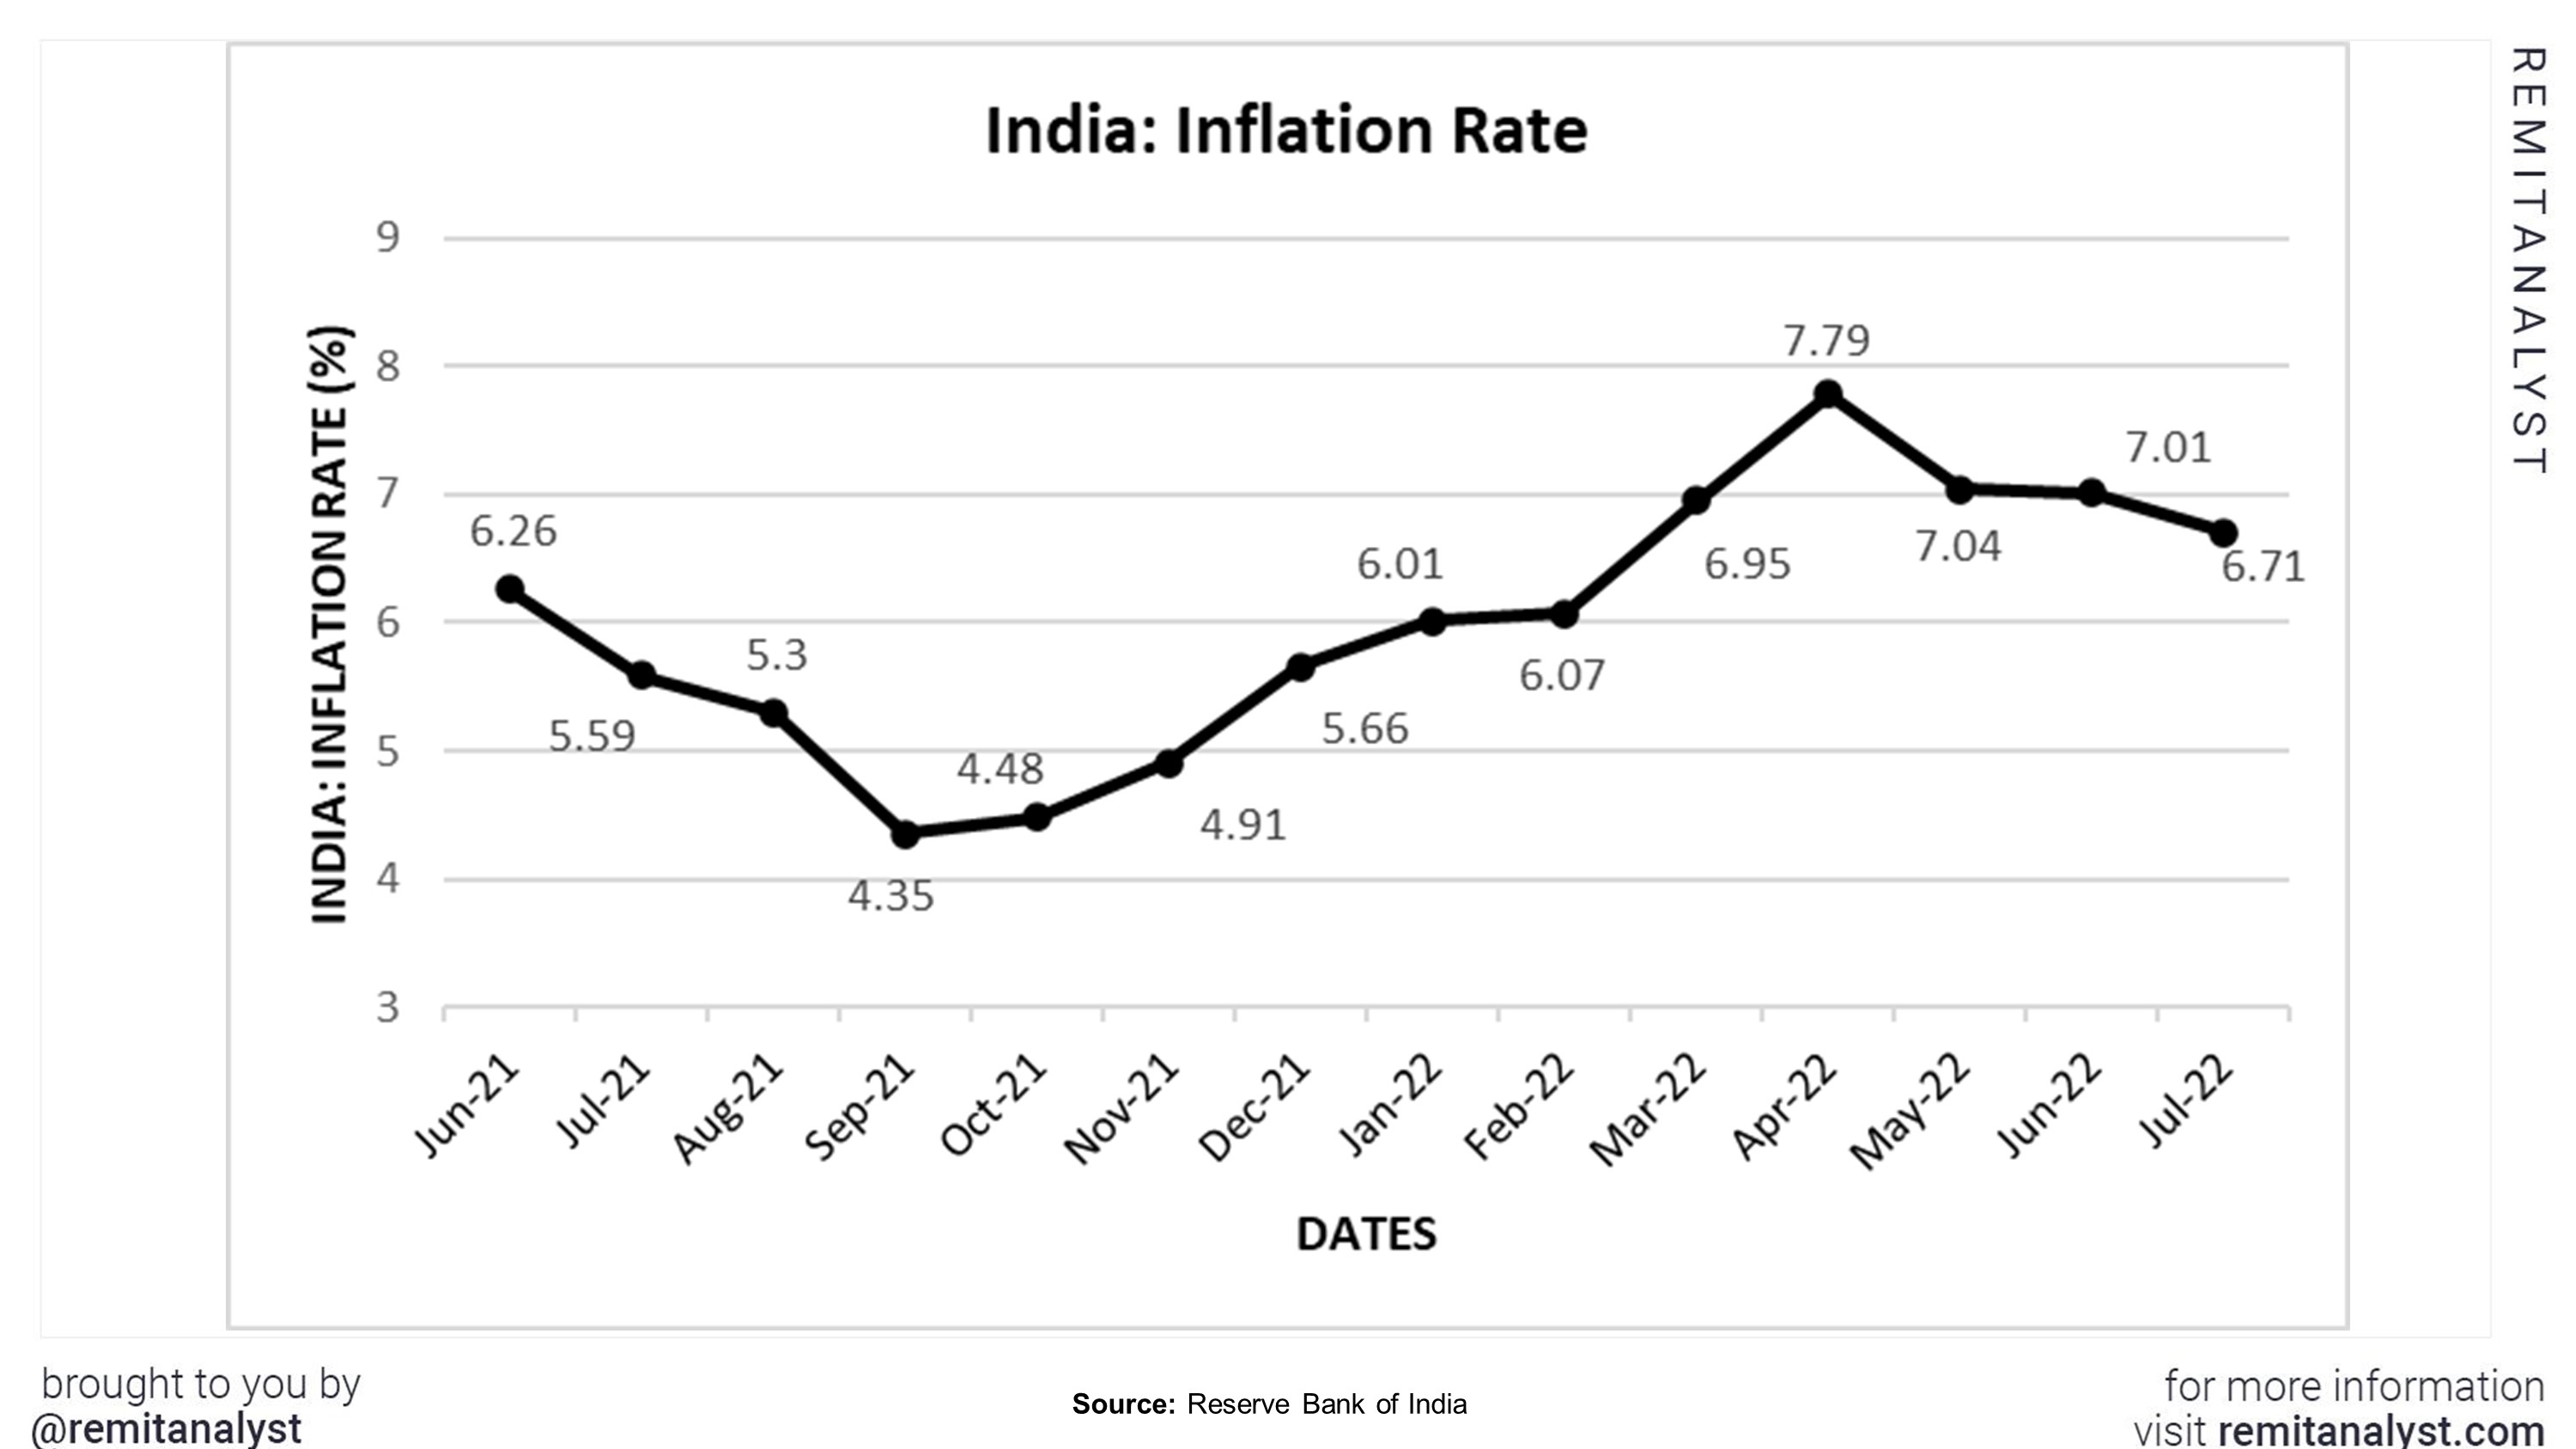 Inflation_Rates_in_India_from_June-2021_to_Jul-22%20.jpg